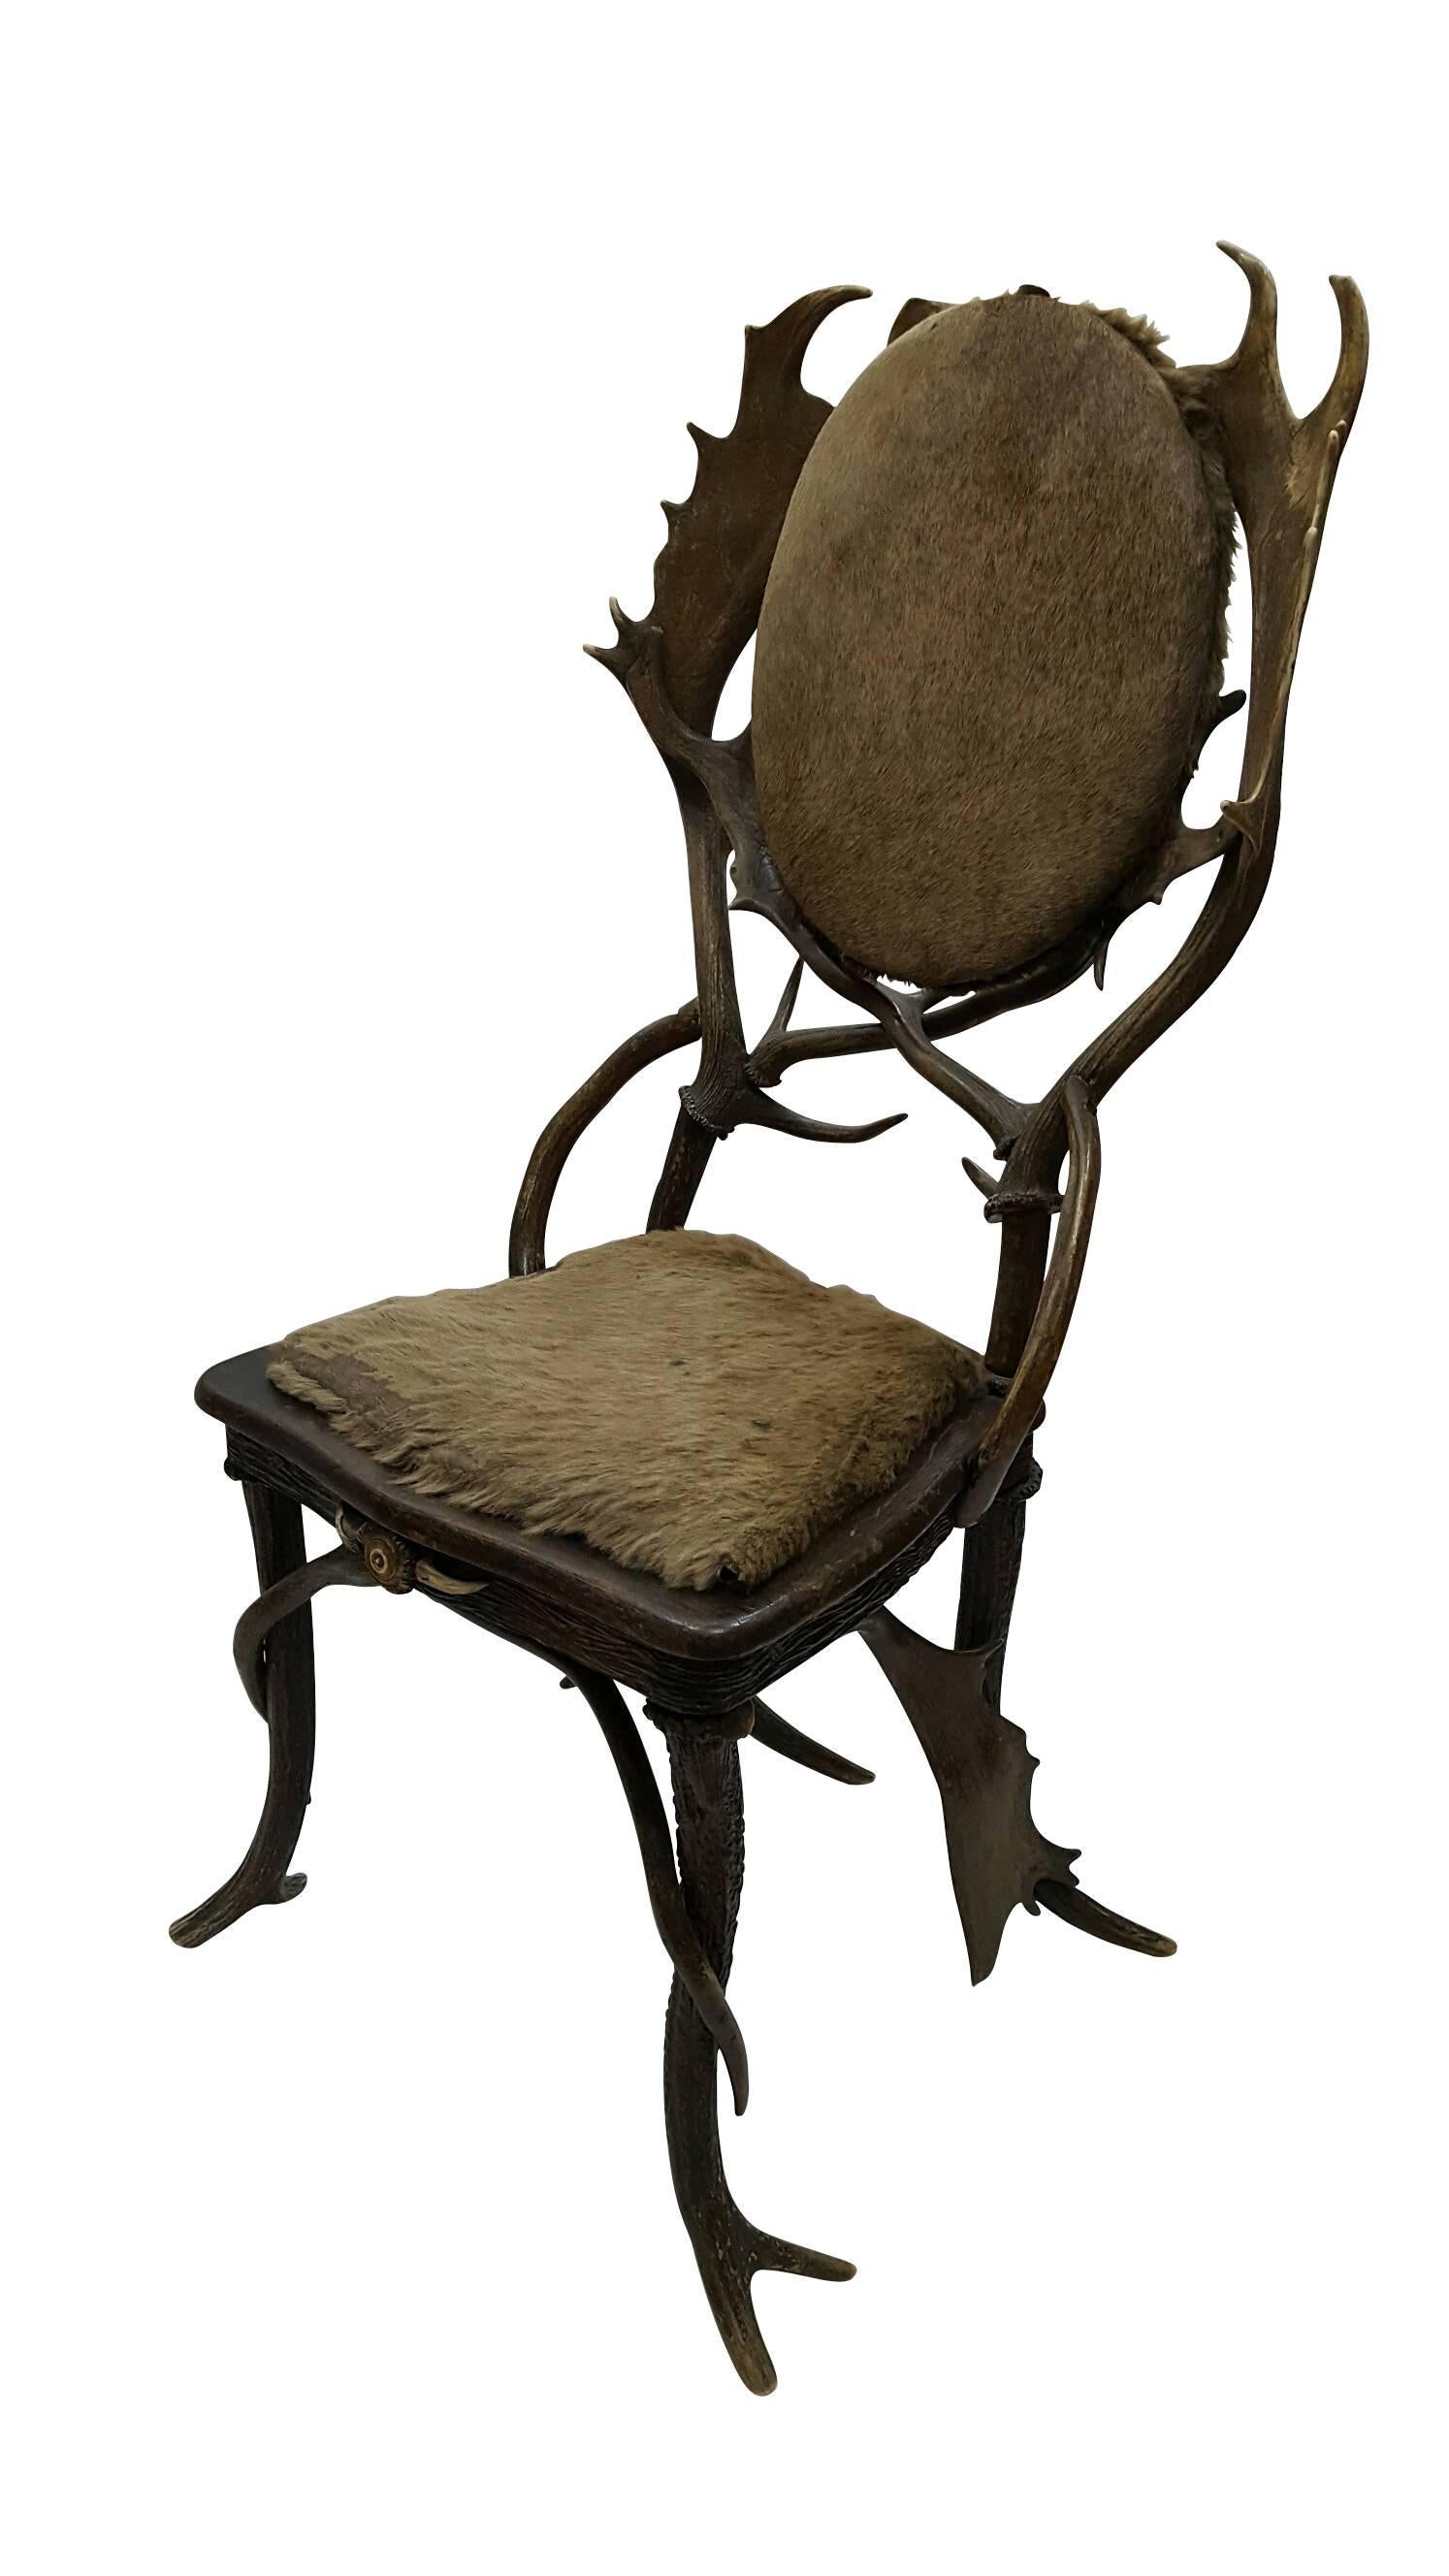 Gorgeous 19th century vintage antler chair 
Dimensions:
22"D x 23" W x 44" H
Sit 14.5" depth x 18" width 
One of the kind piece.